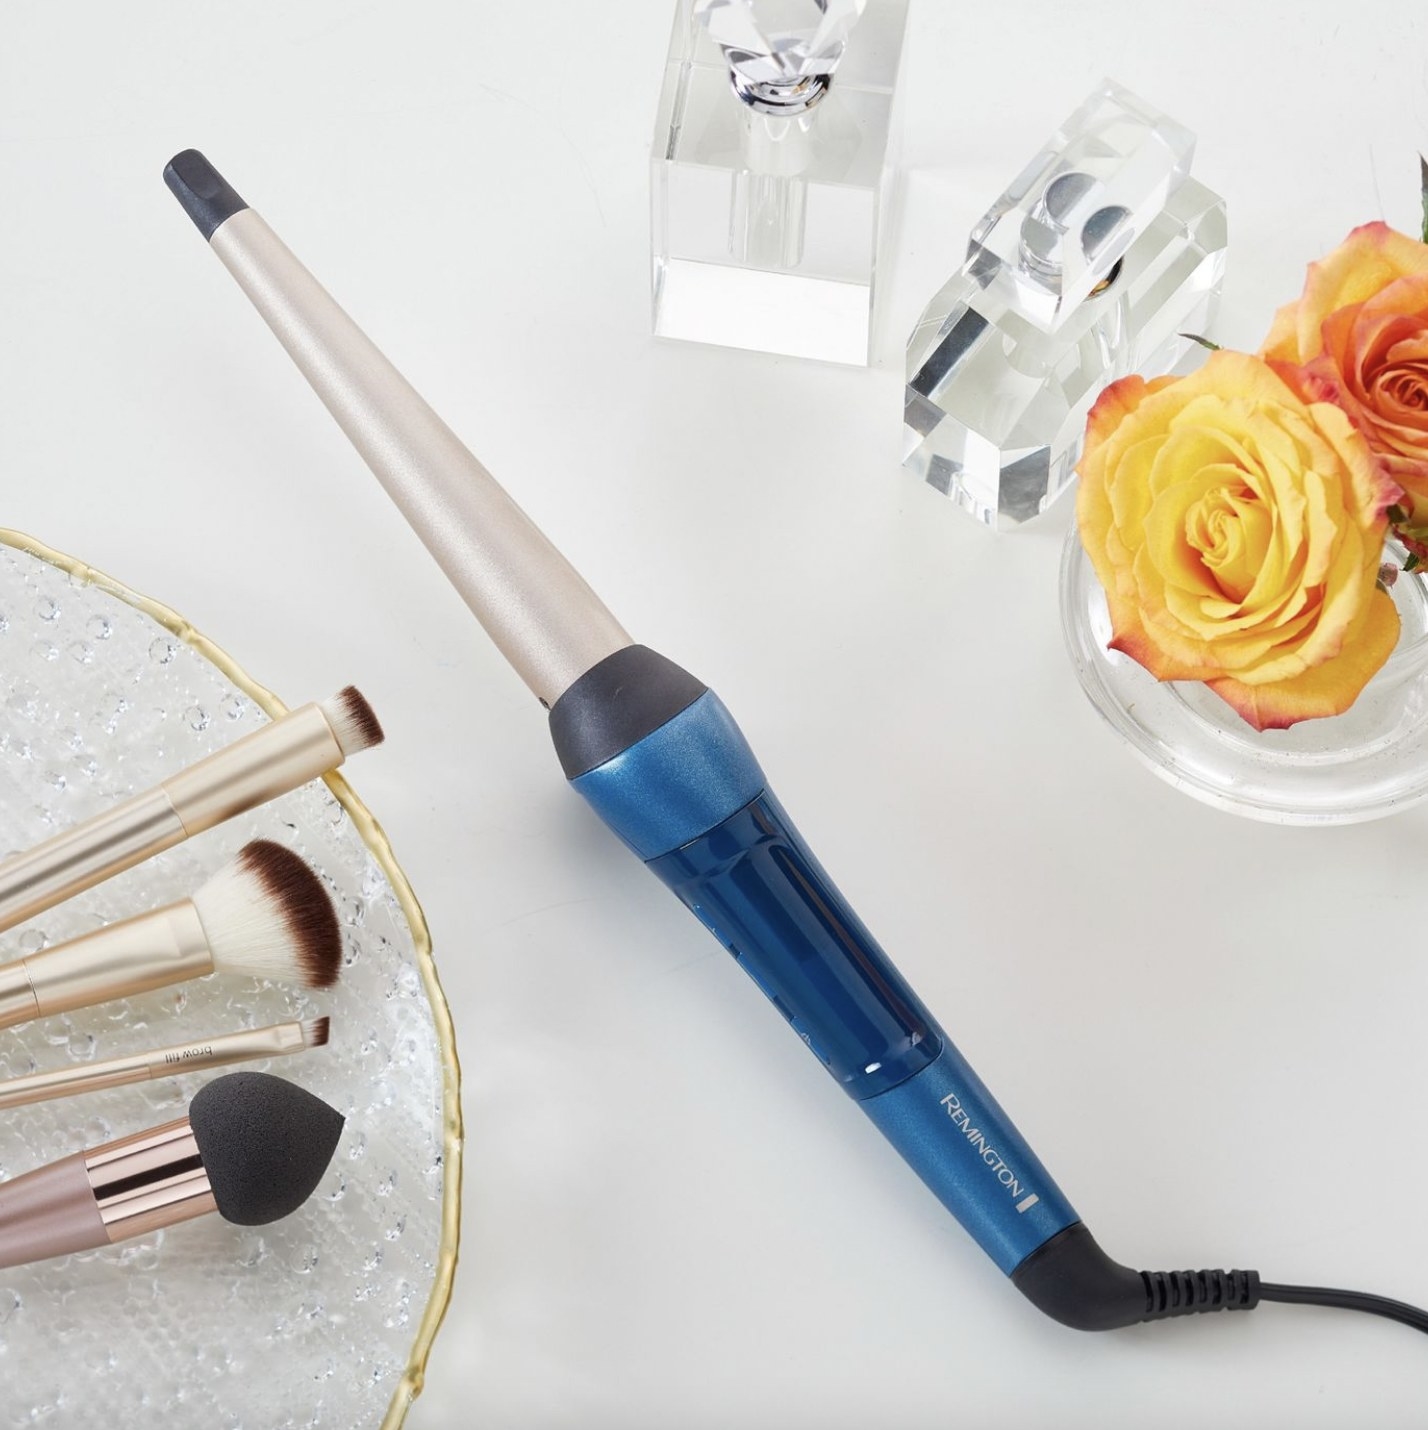 A hair curling wand with makeup brushes and a rose